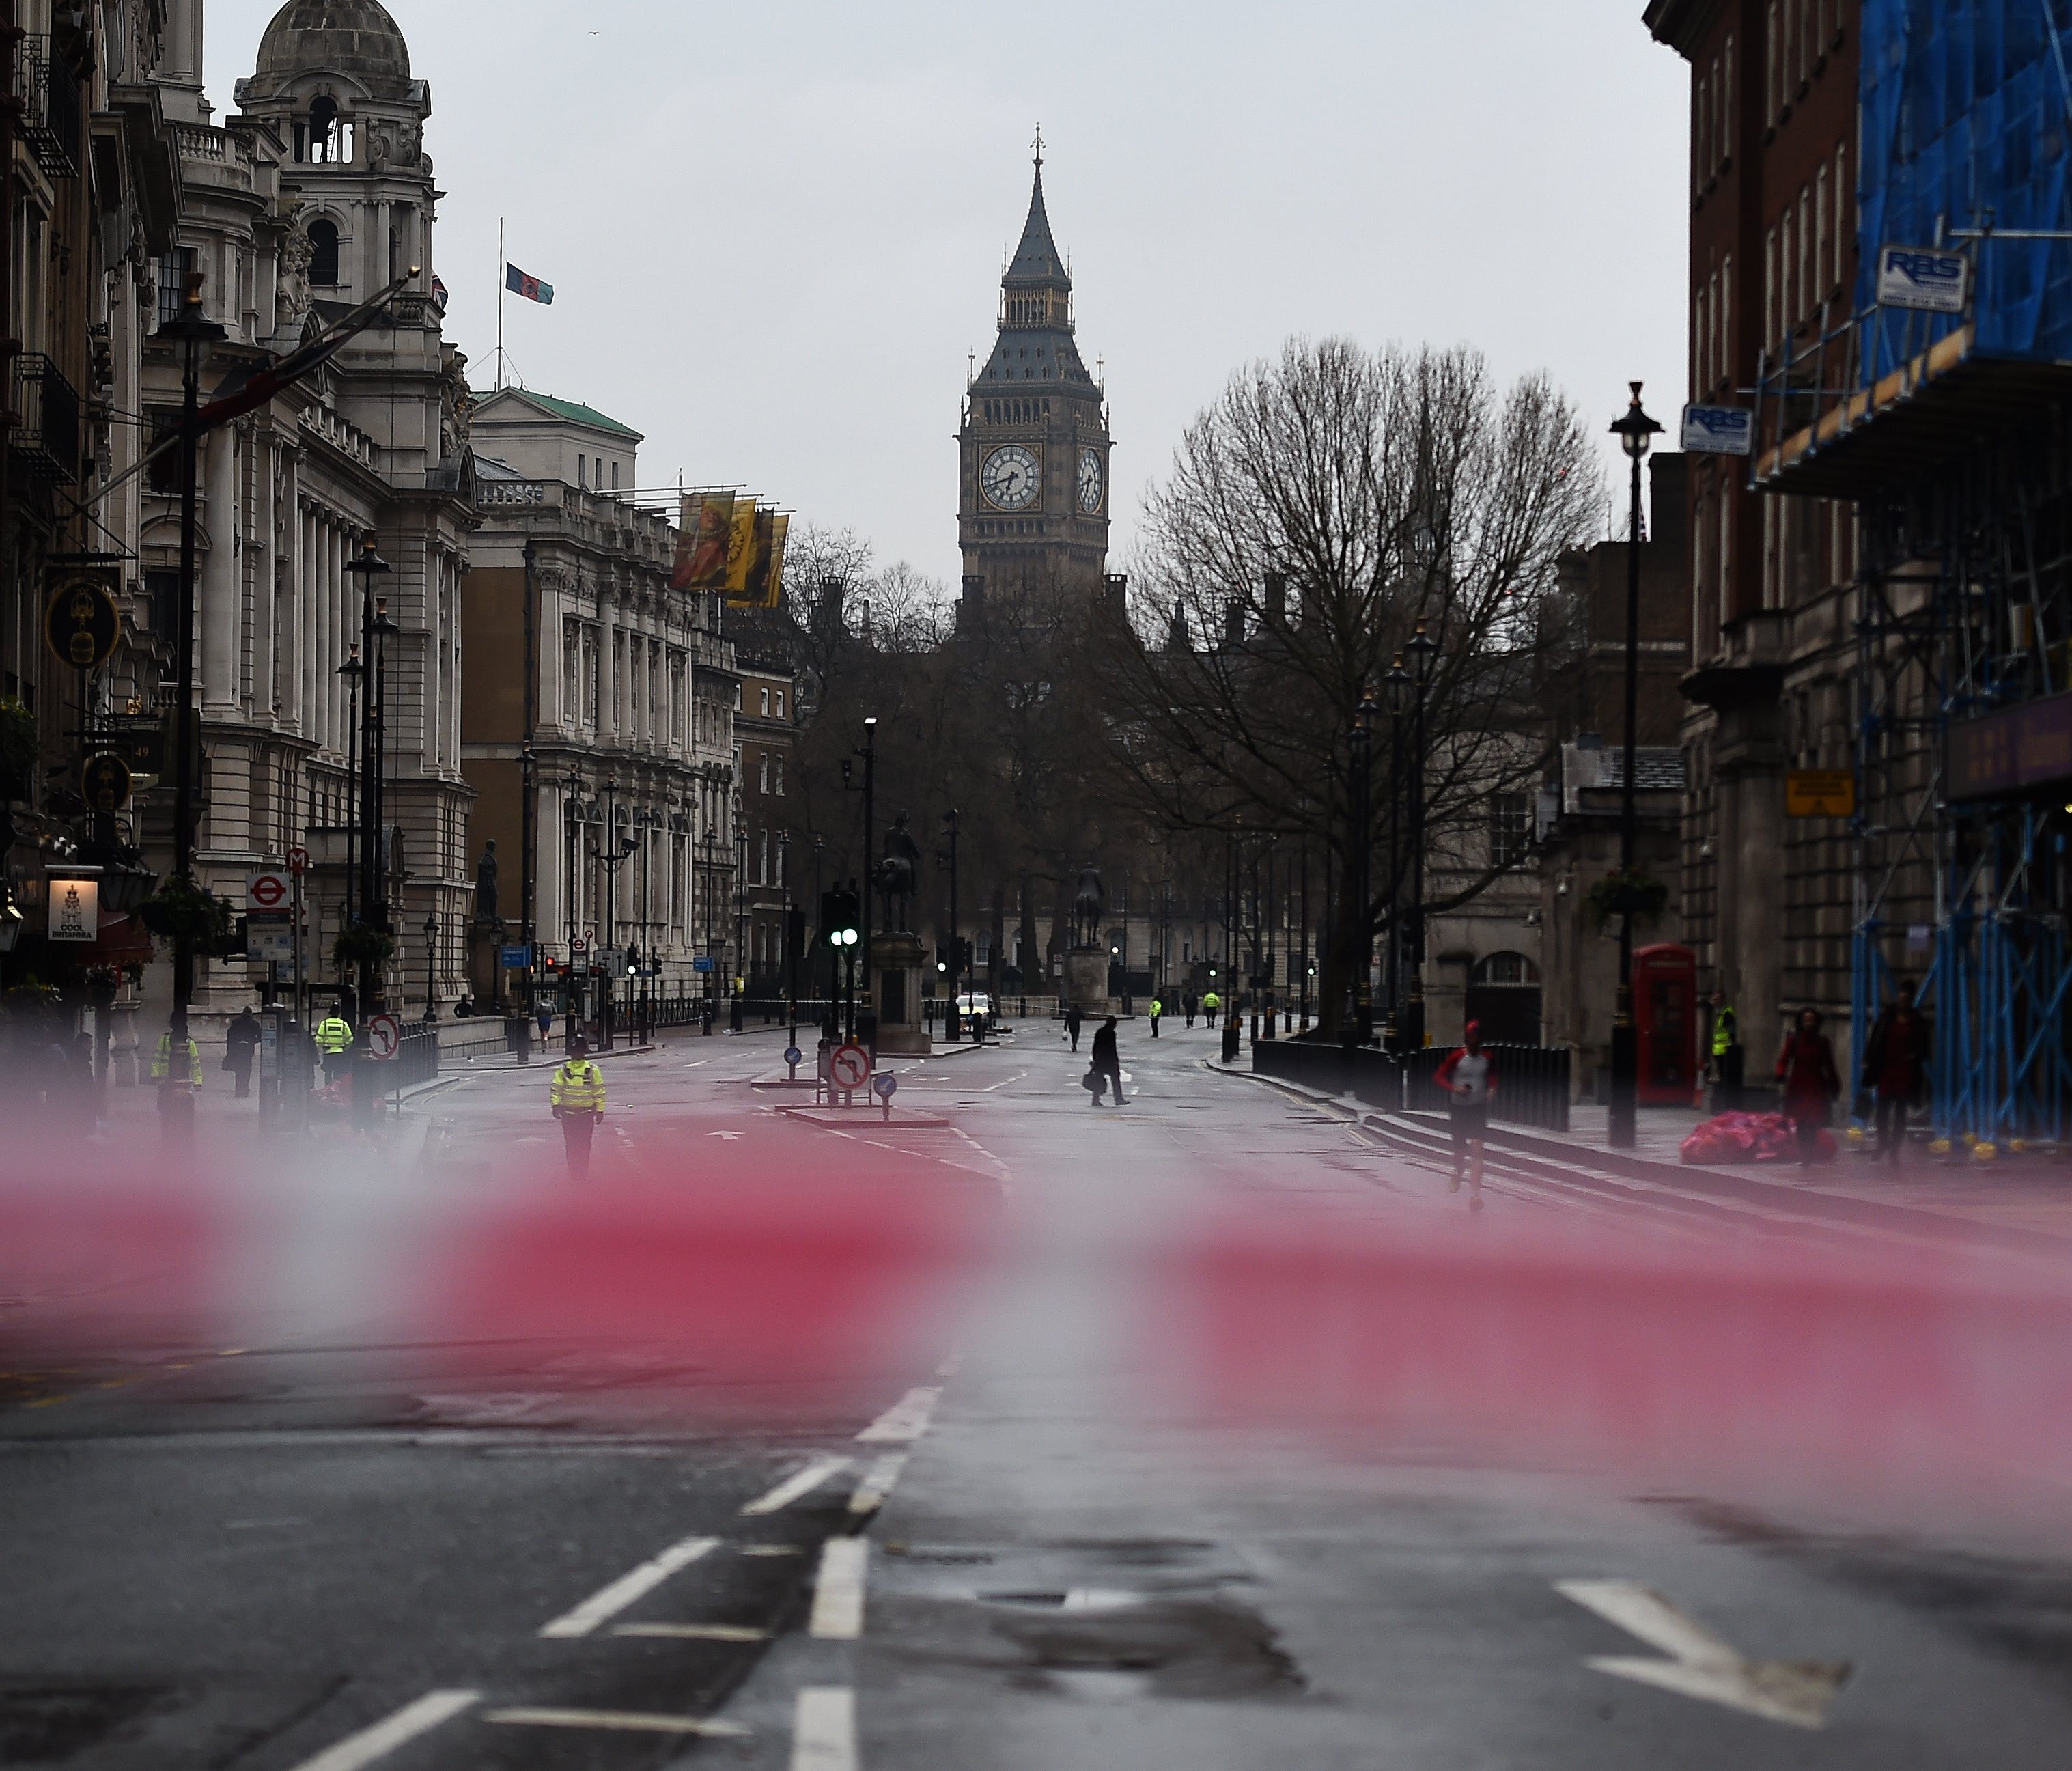 A locked down Whitehall in central London on March 23, 2017.